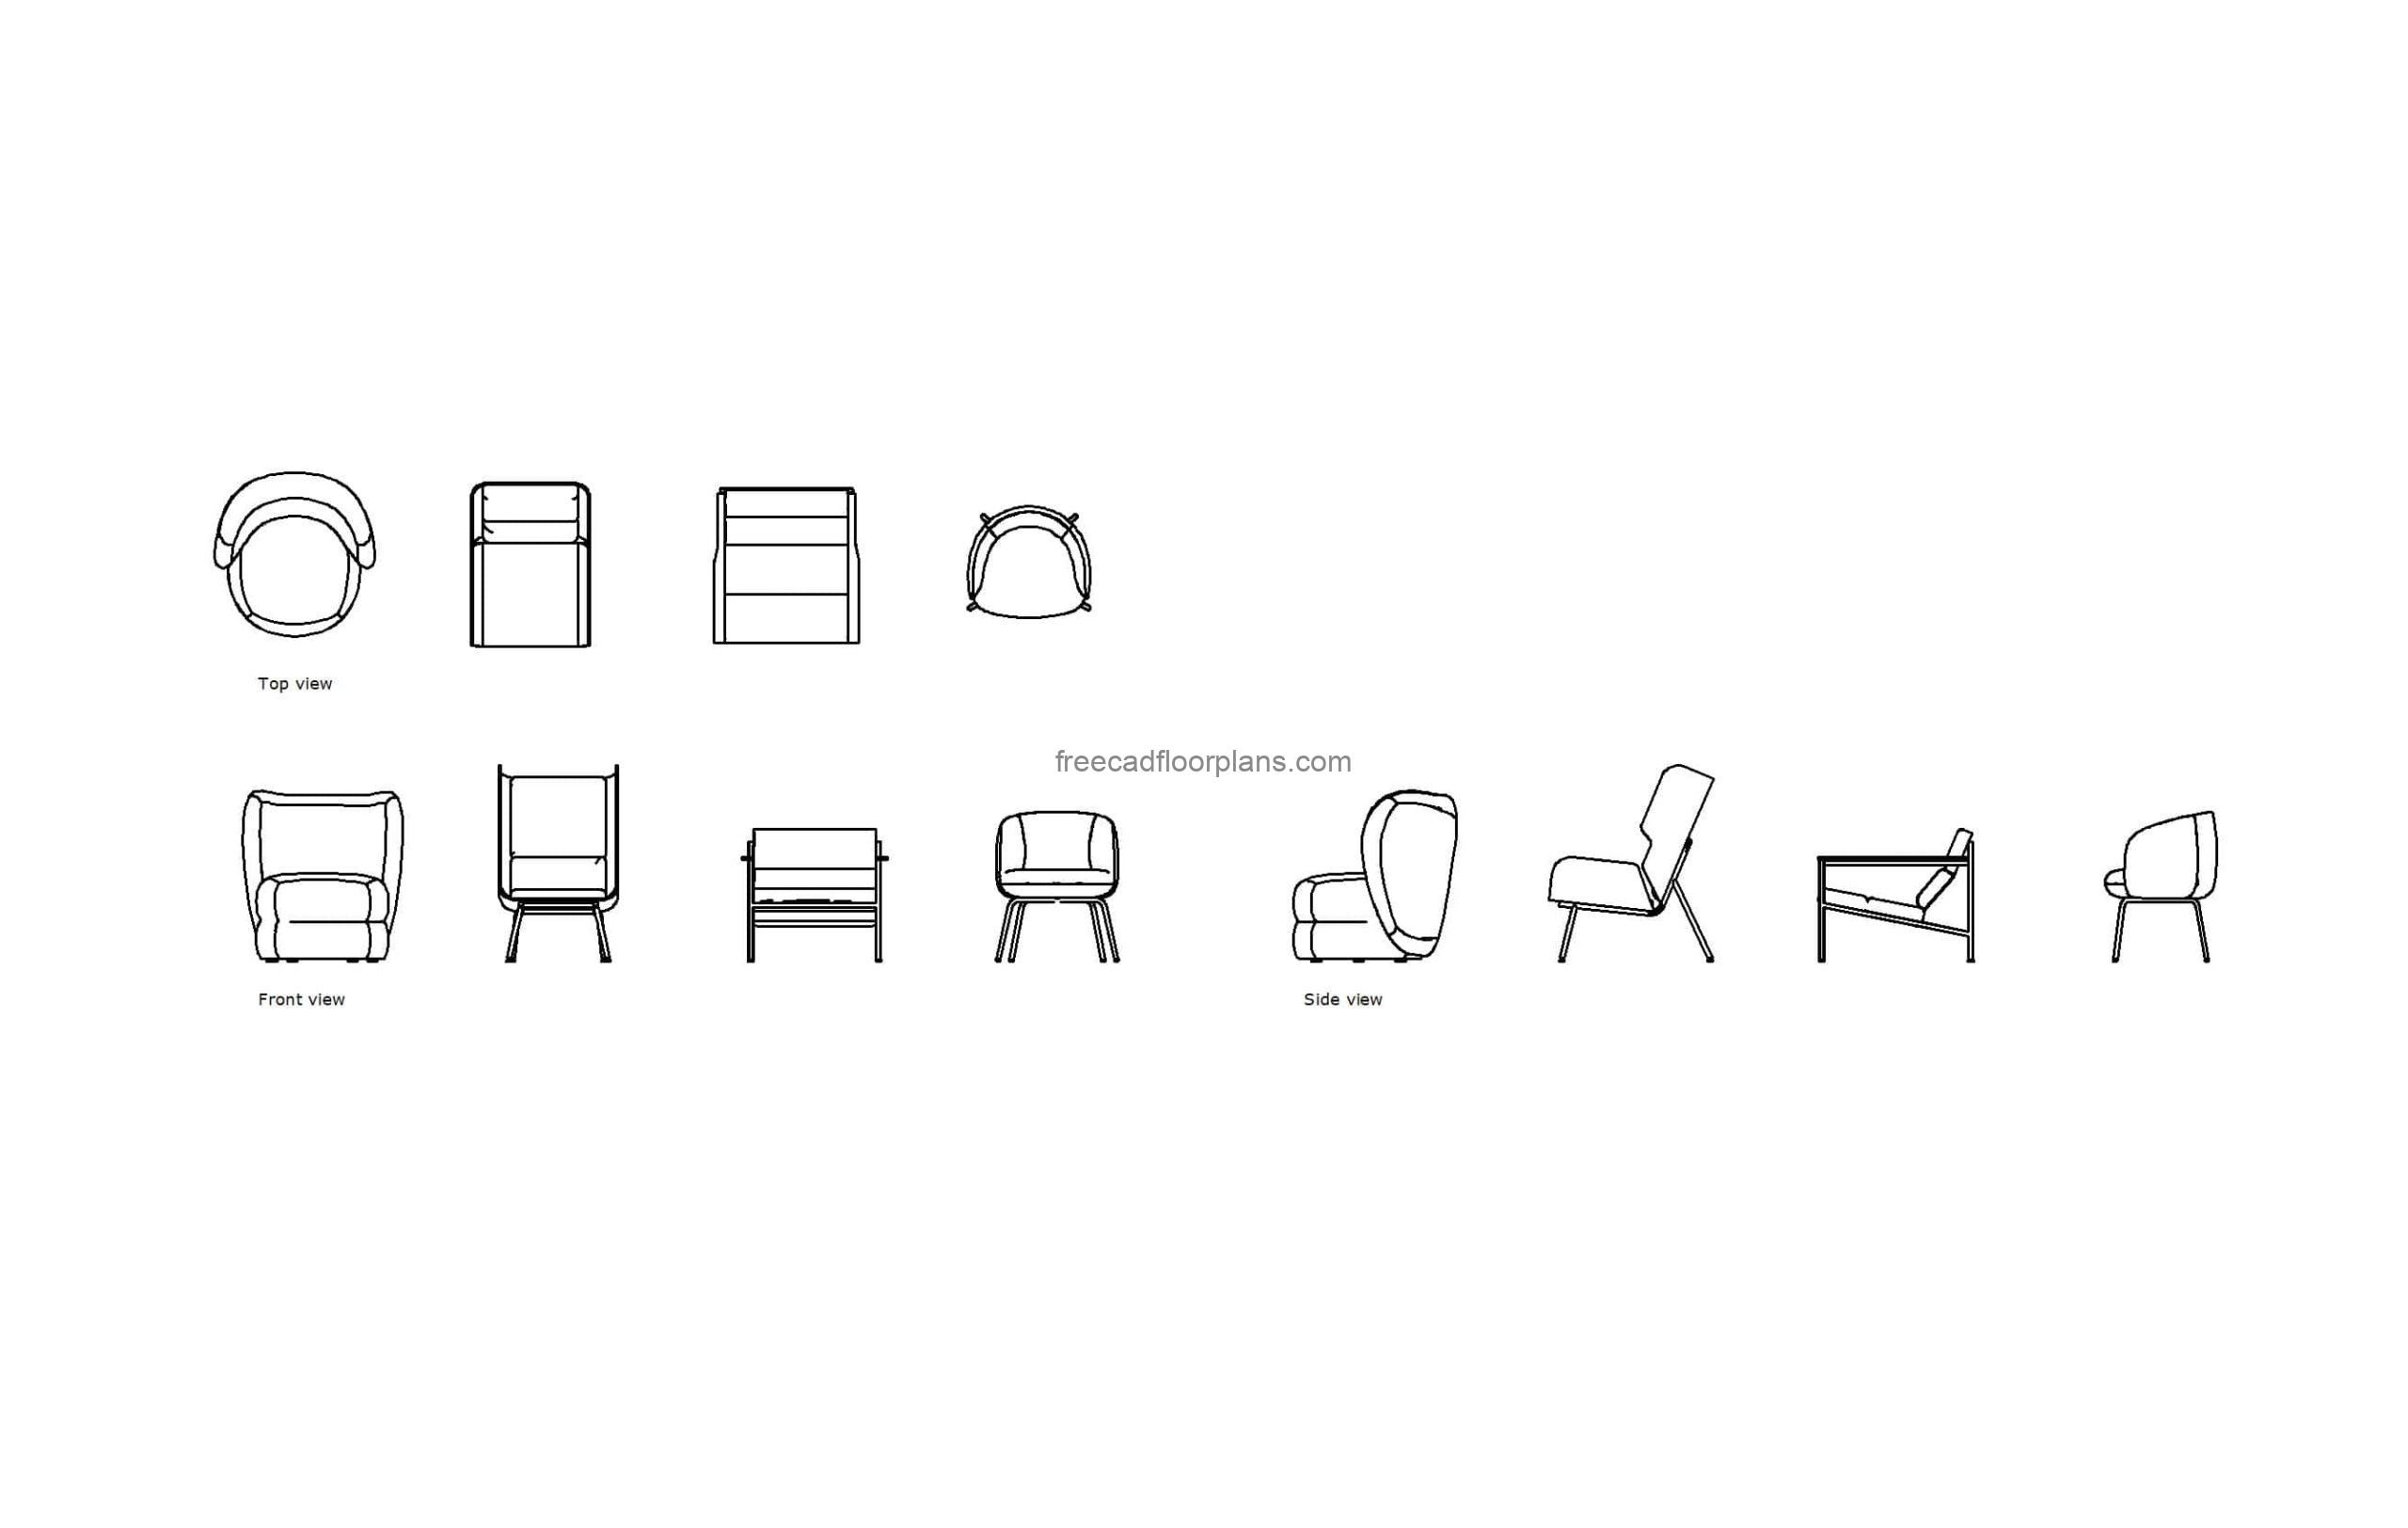 autocad drawing of different modern chair, plan and elevation 2d views, dwg file free for download